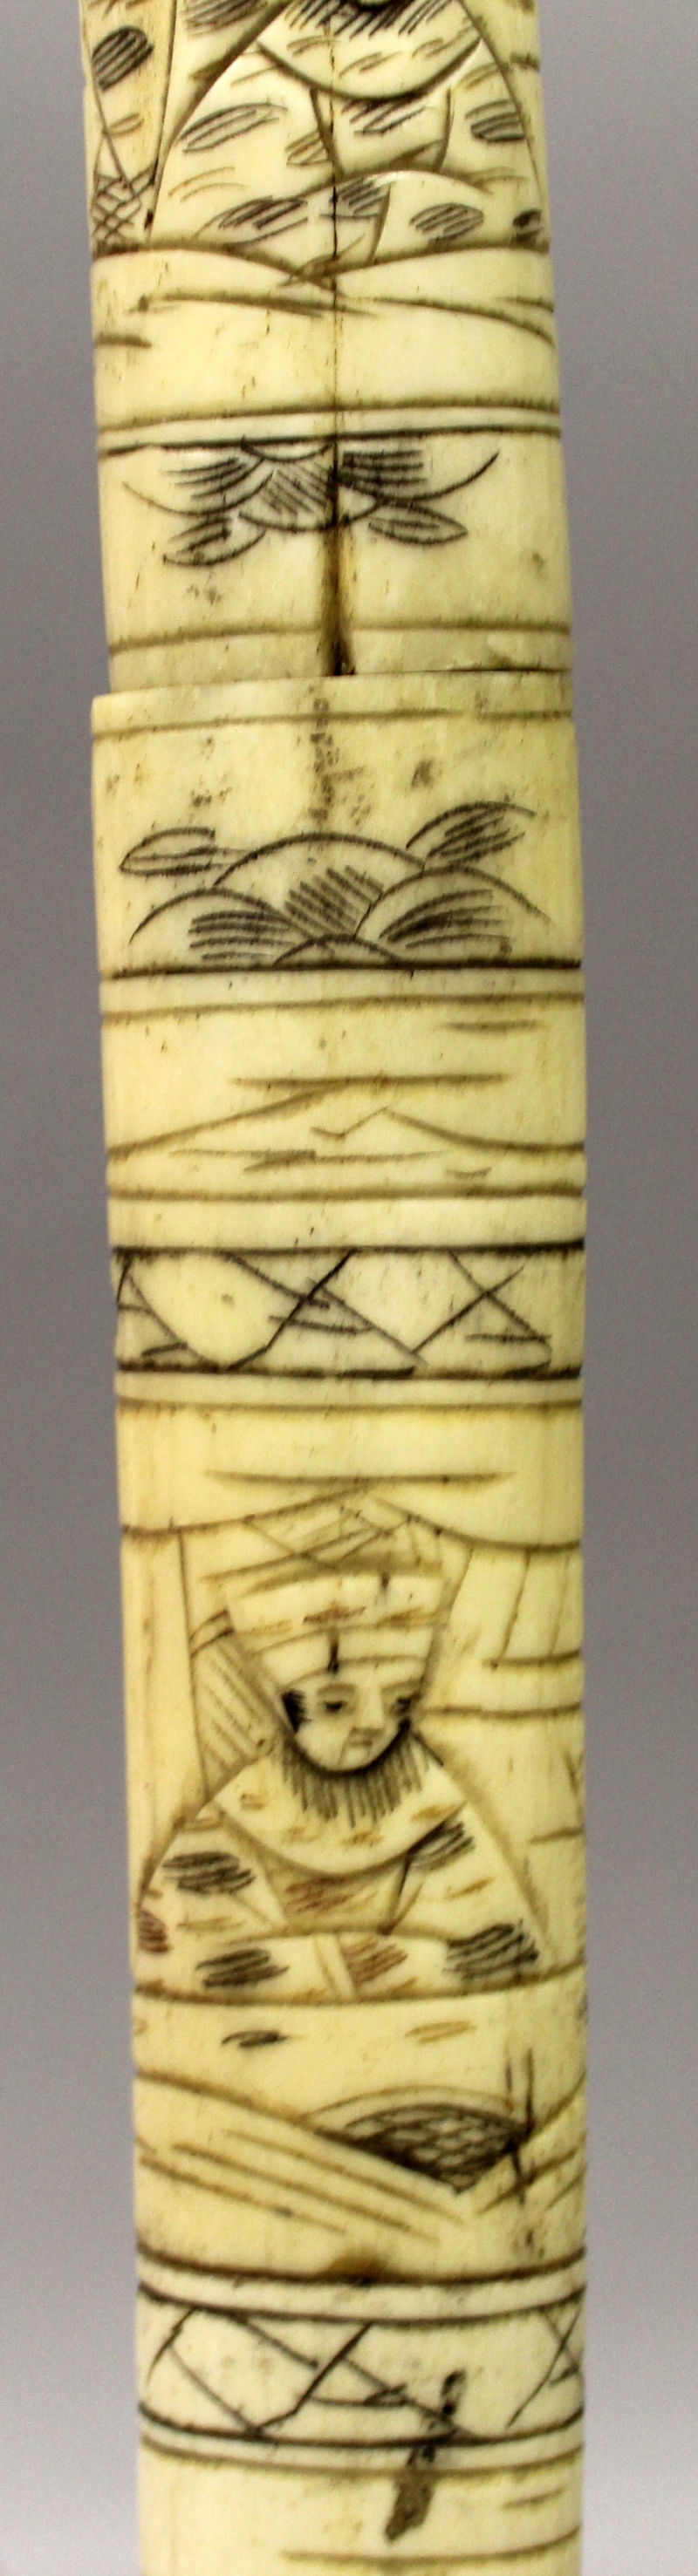 AN EARLY 20TH CENTURY JAPANESE BONE IVORY TANTO, with steel blade and carved figural decoration, - Image 3 of 10